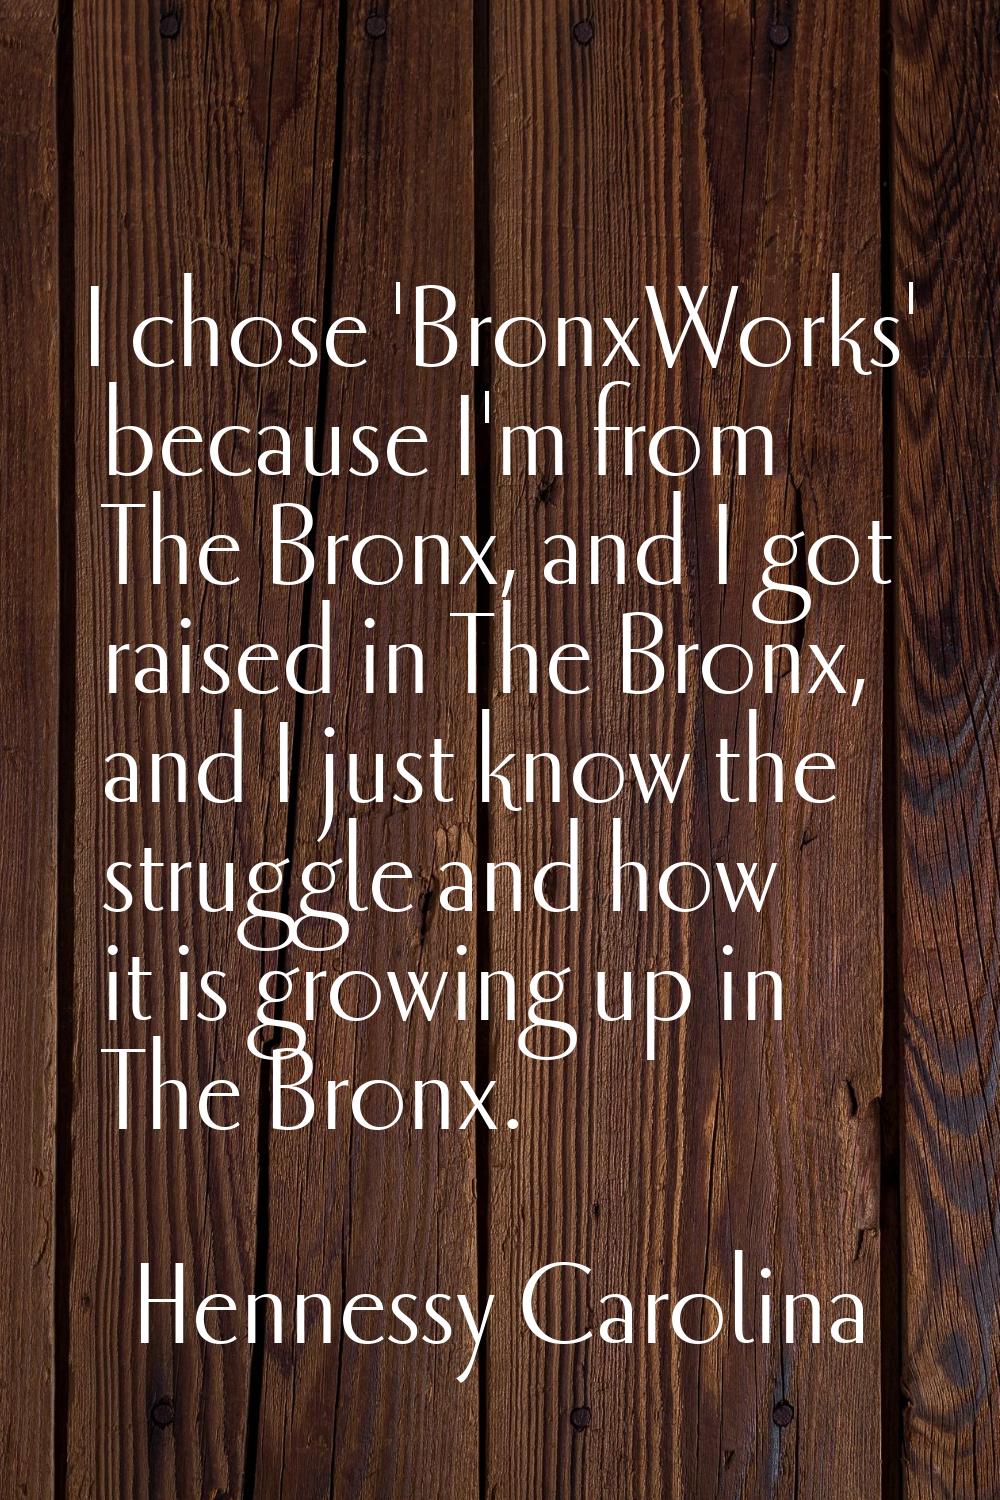 I chose 'BronxWorks' because I'm from The Bronx, and I got raised in The Bronx, and I just know the